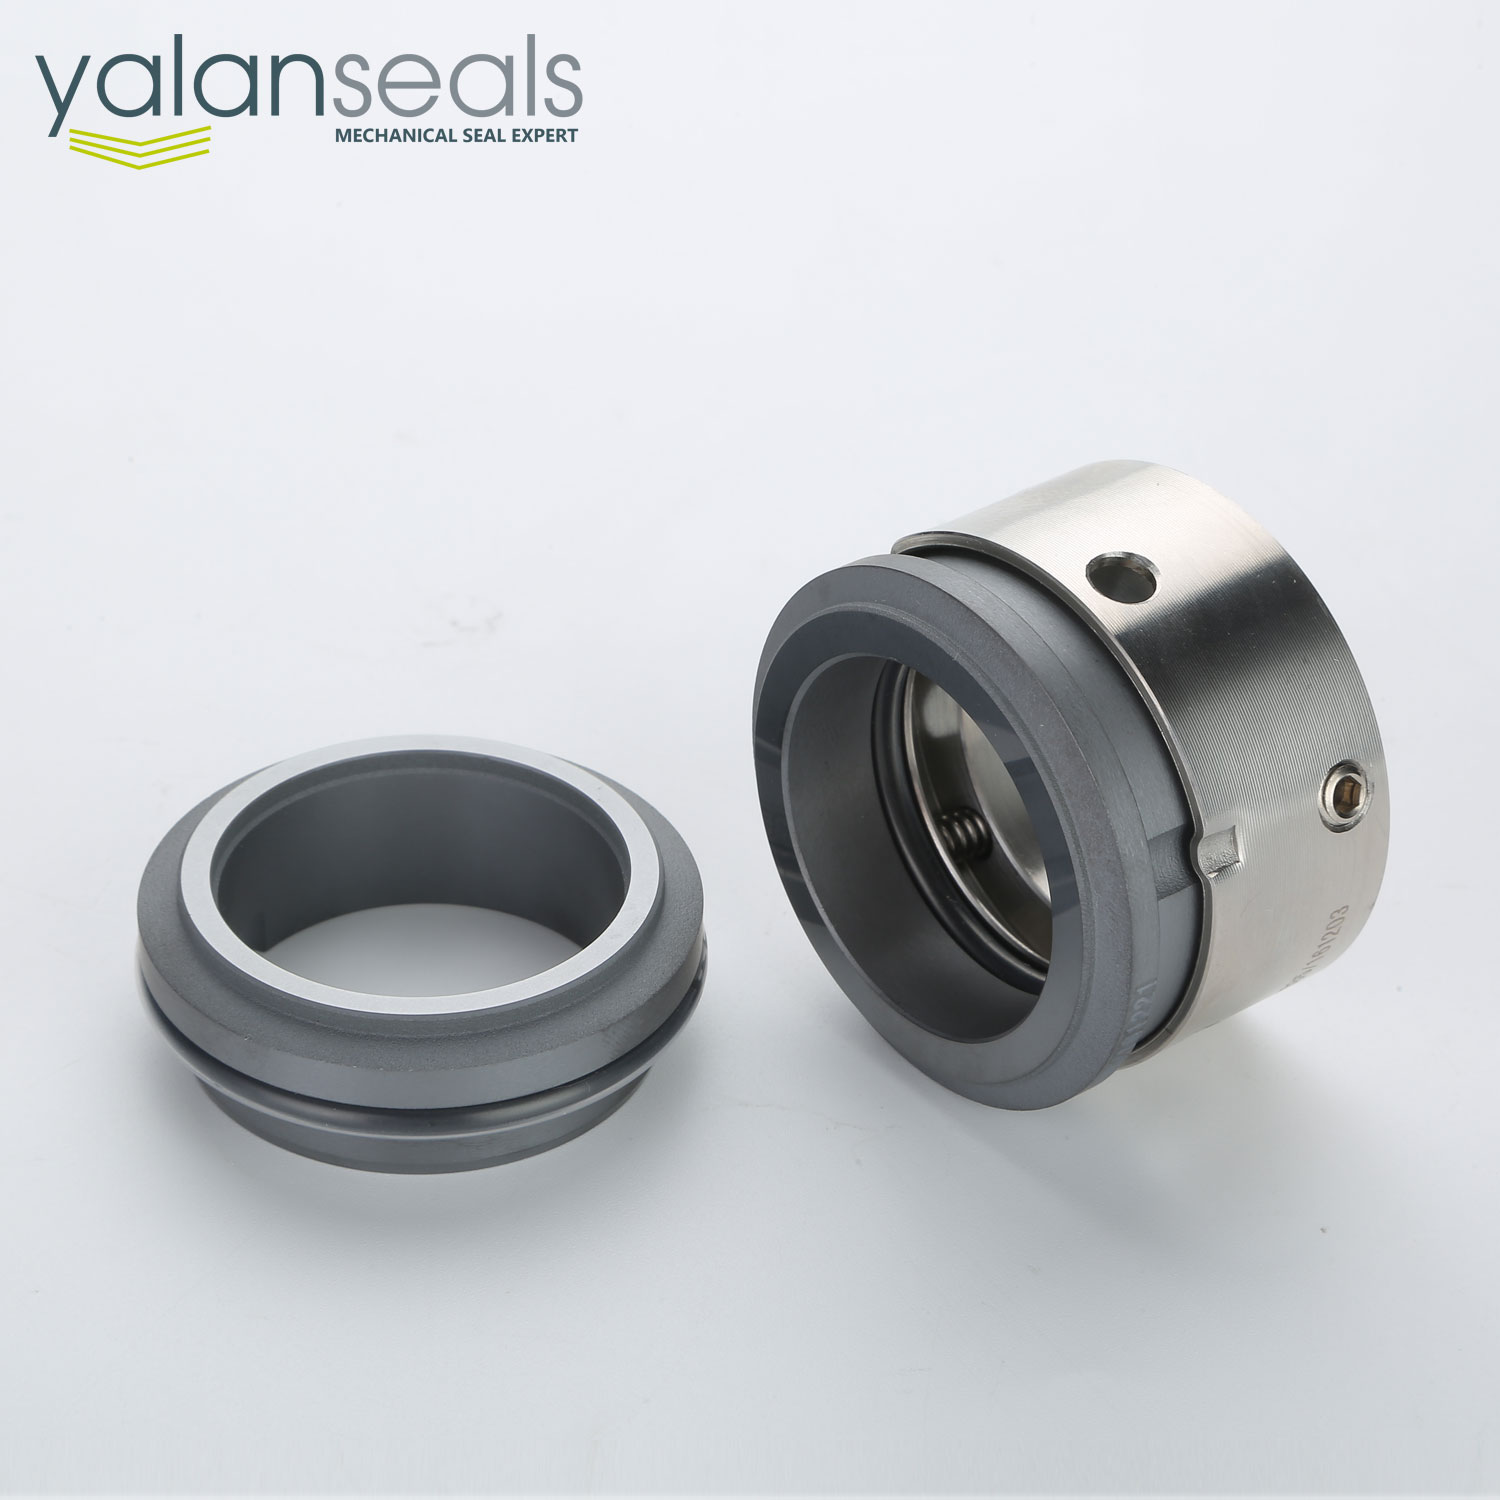 YALAN TM Multiple Springs Mechanical Seal for Chemical Centrifugal Pumps